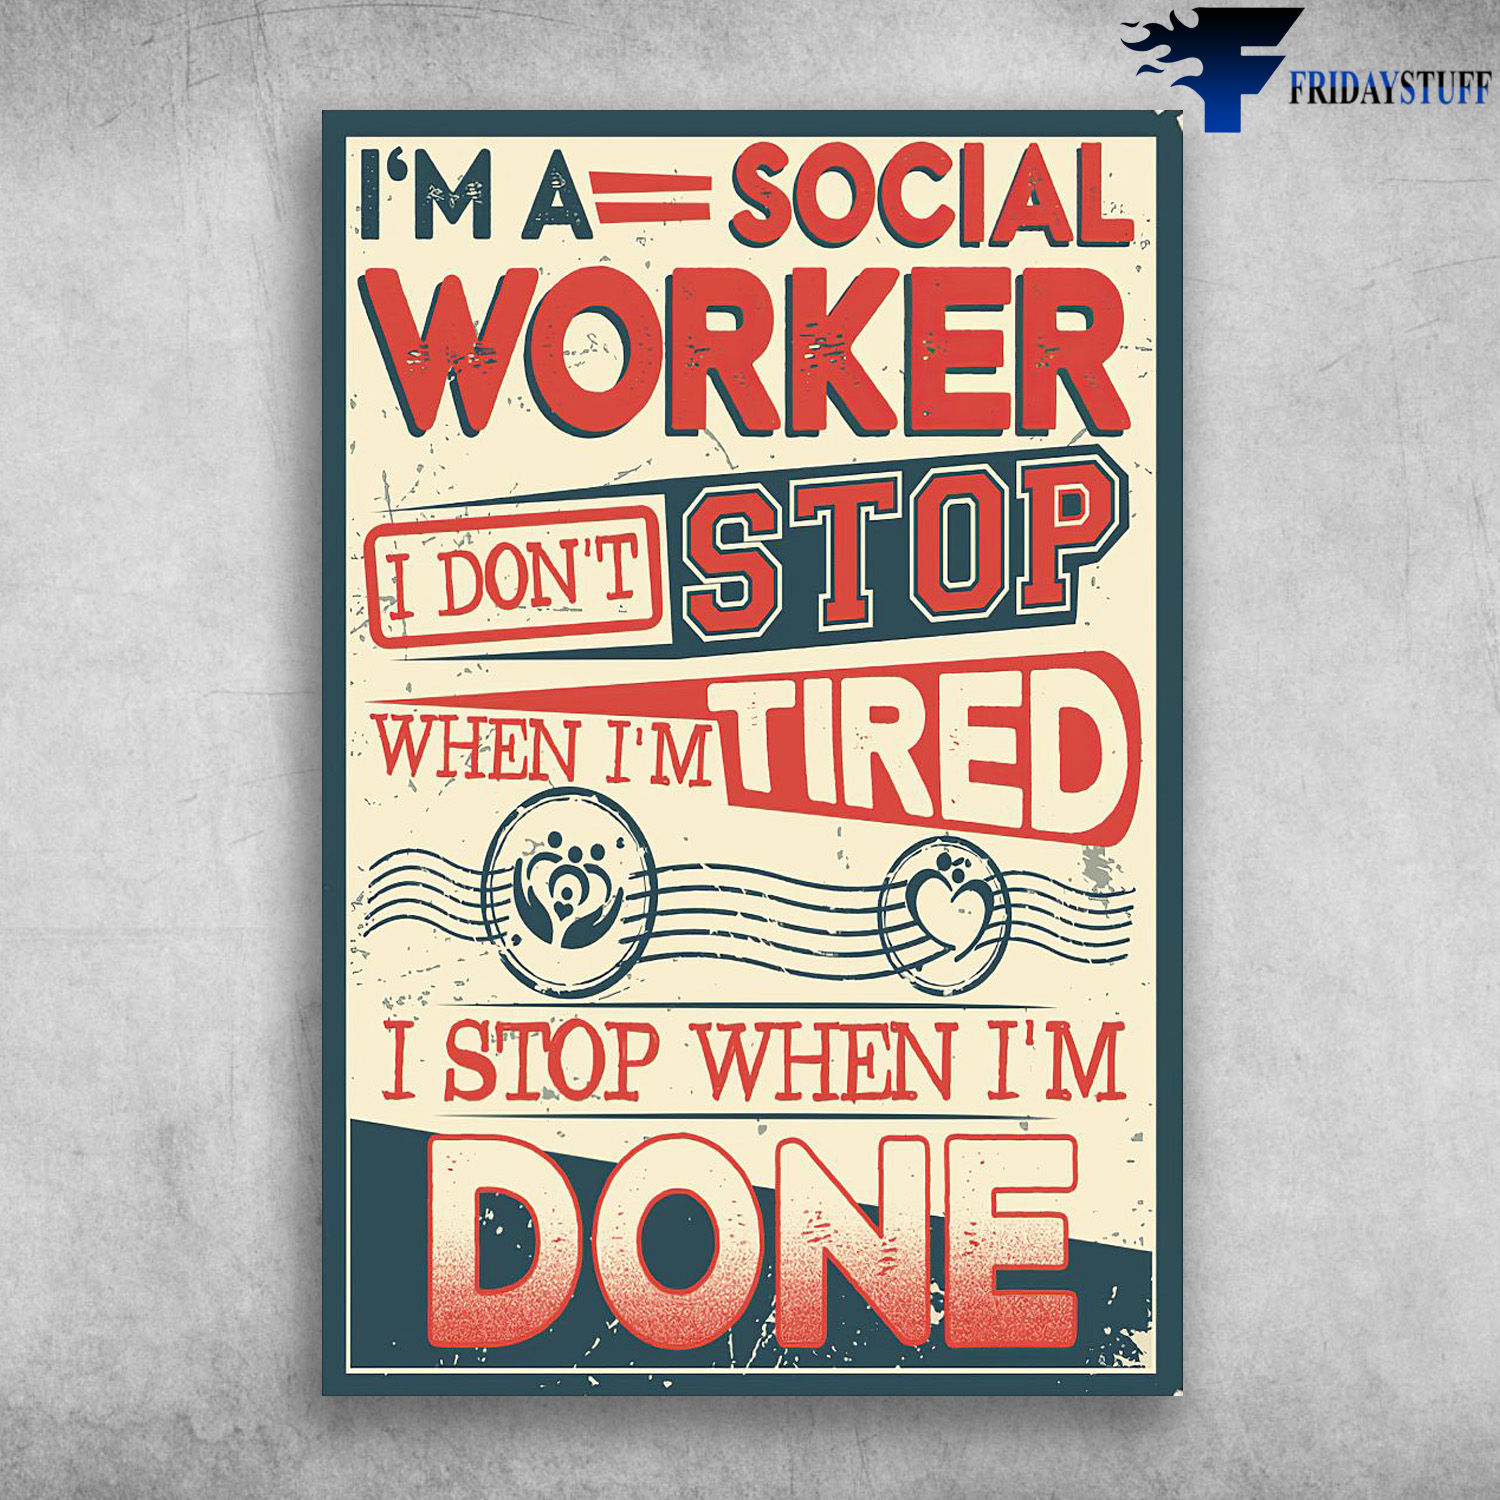 Social Worker - I'm A Social Worker, I Don't Stop, When I'm Tired, I Stop When I'm Done